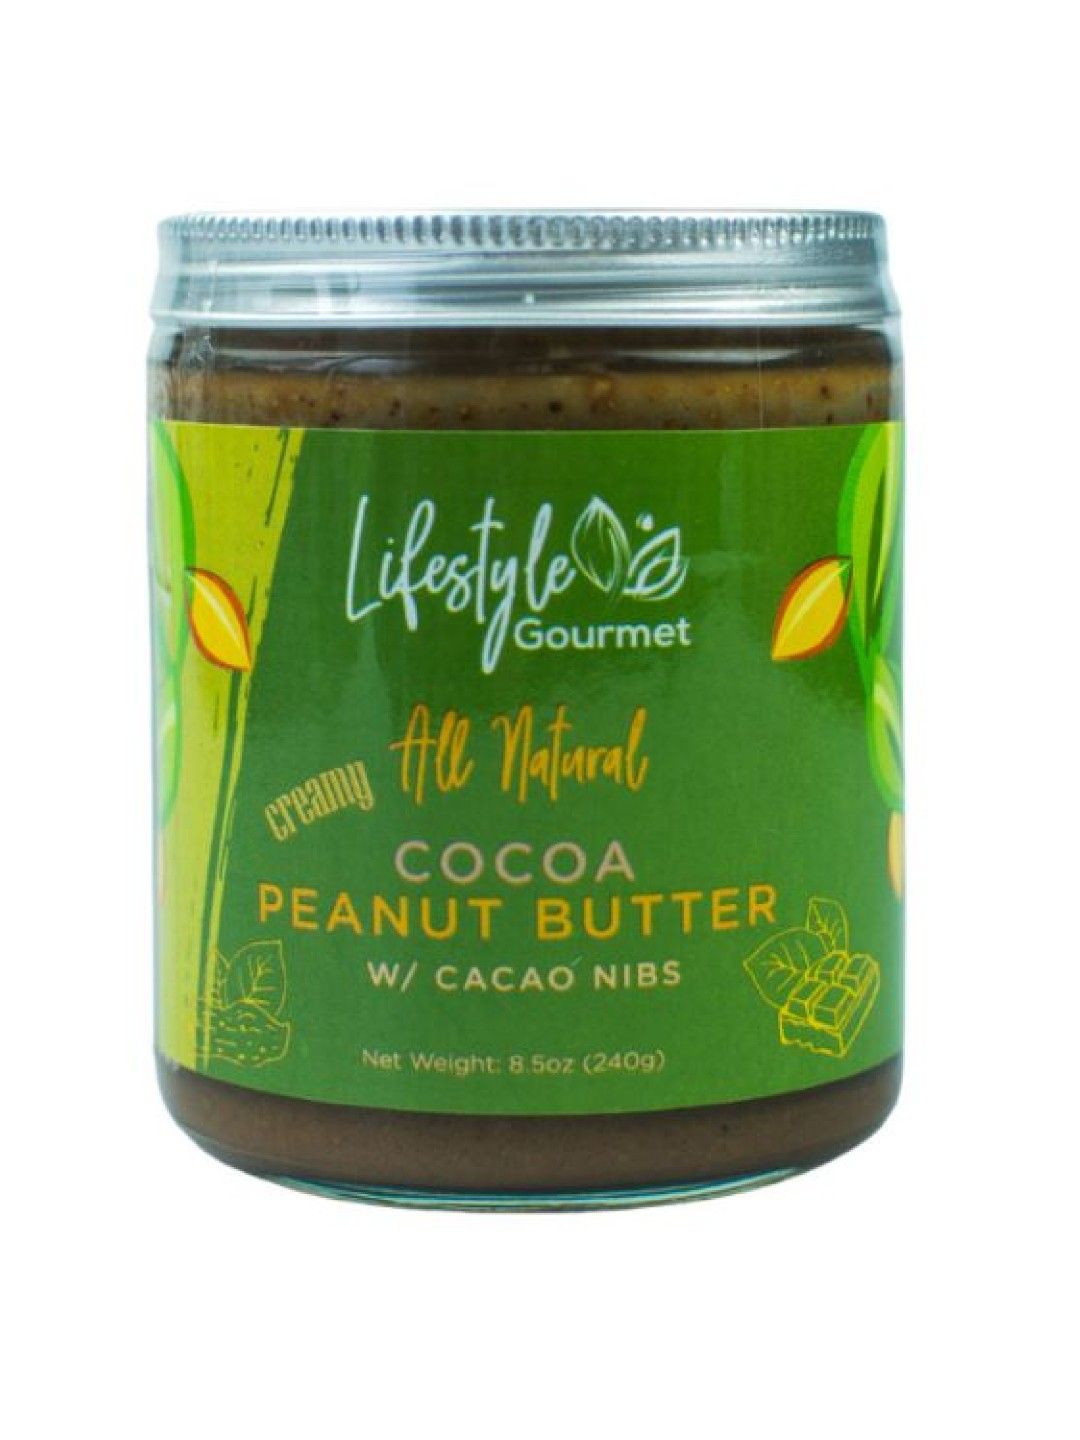 Lifestyle Gourmet Cocoa Peanut Butter